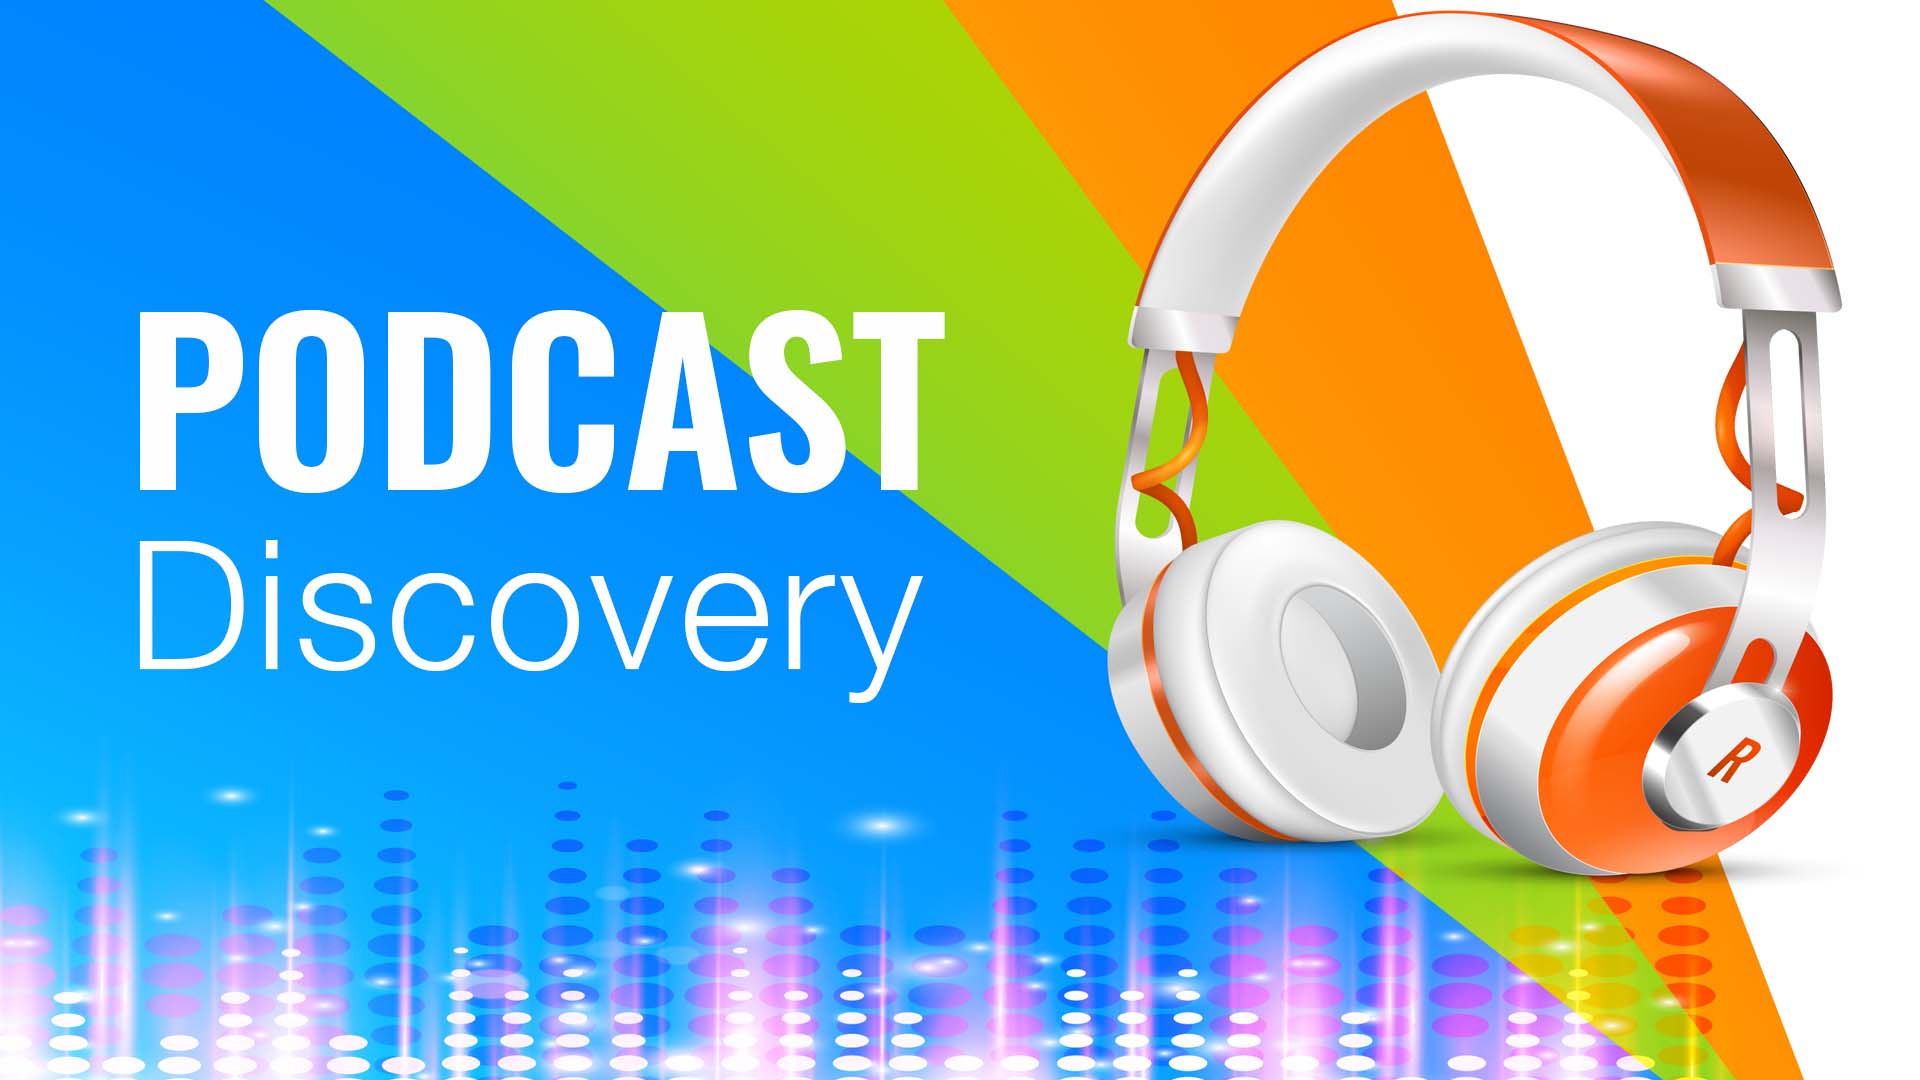 Podcast discovery